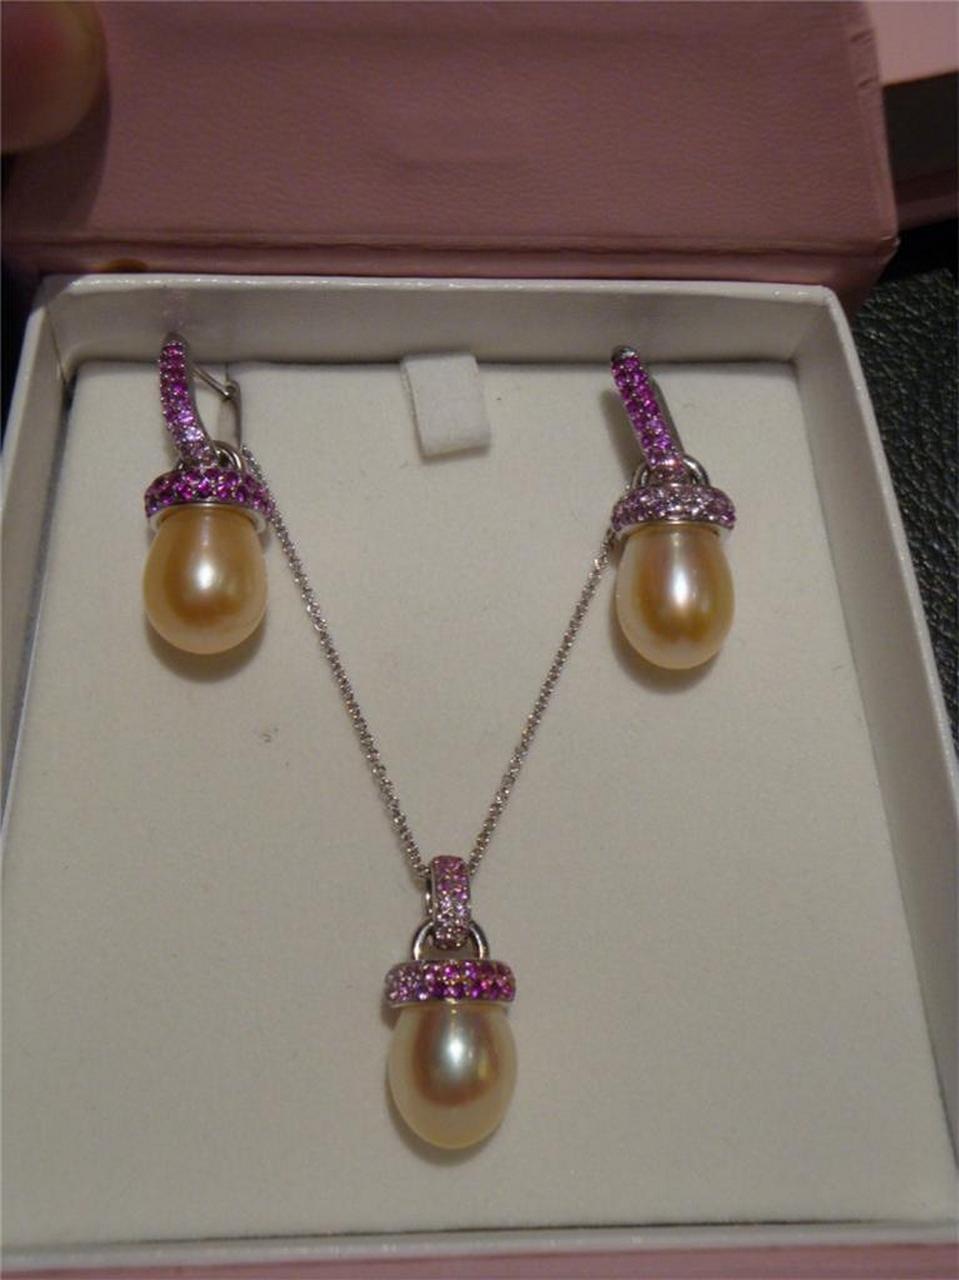 The Following Item we are offering is this Beautiful NEW Italian 18 Karat White Gold High Luster Genuine Large Pink Pearl Pendant Necklace and Earring Set Magnificently adorned with 3 Carats of Glittering Rubies and Sapphires!! NEW IN BOX WITH